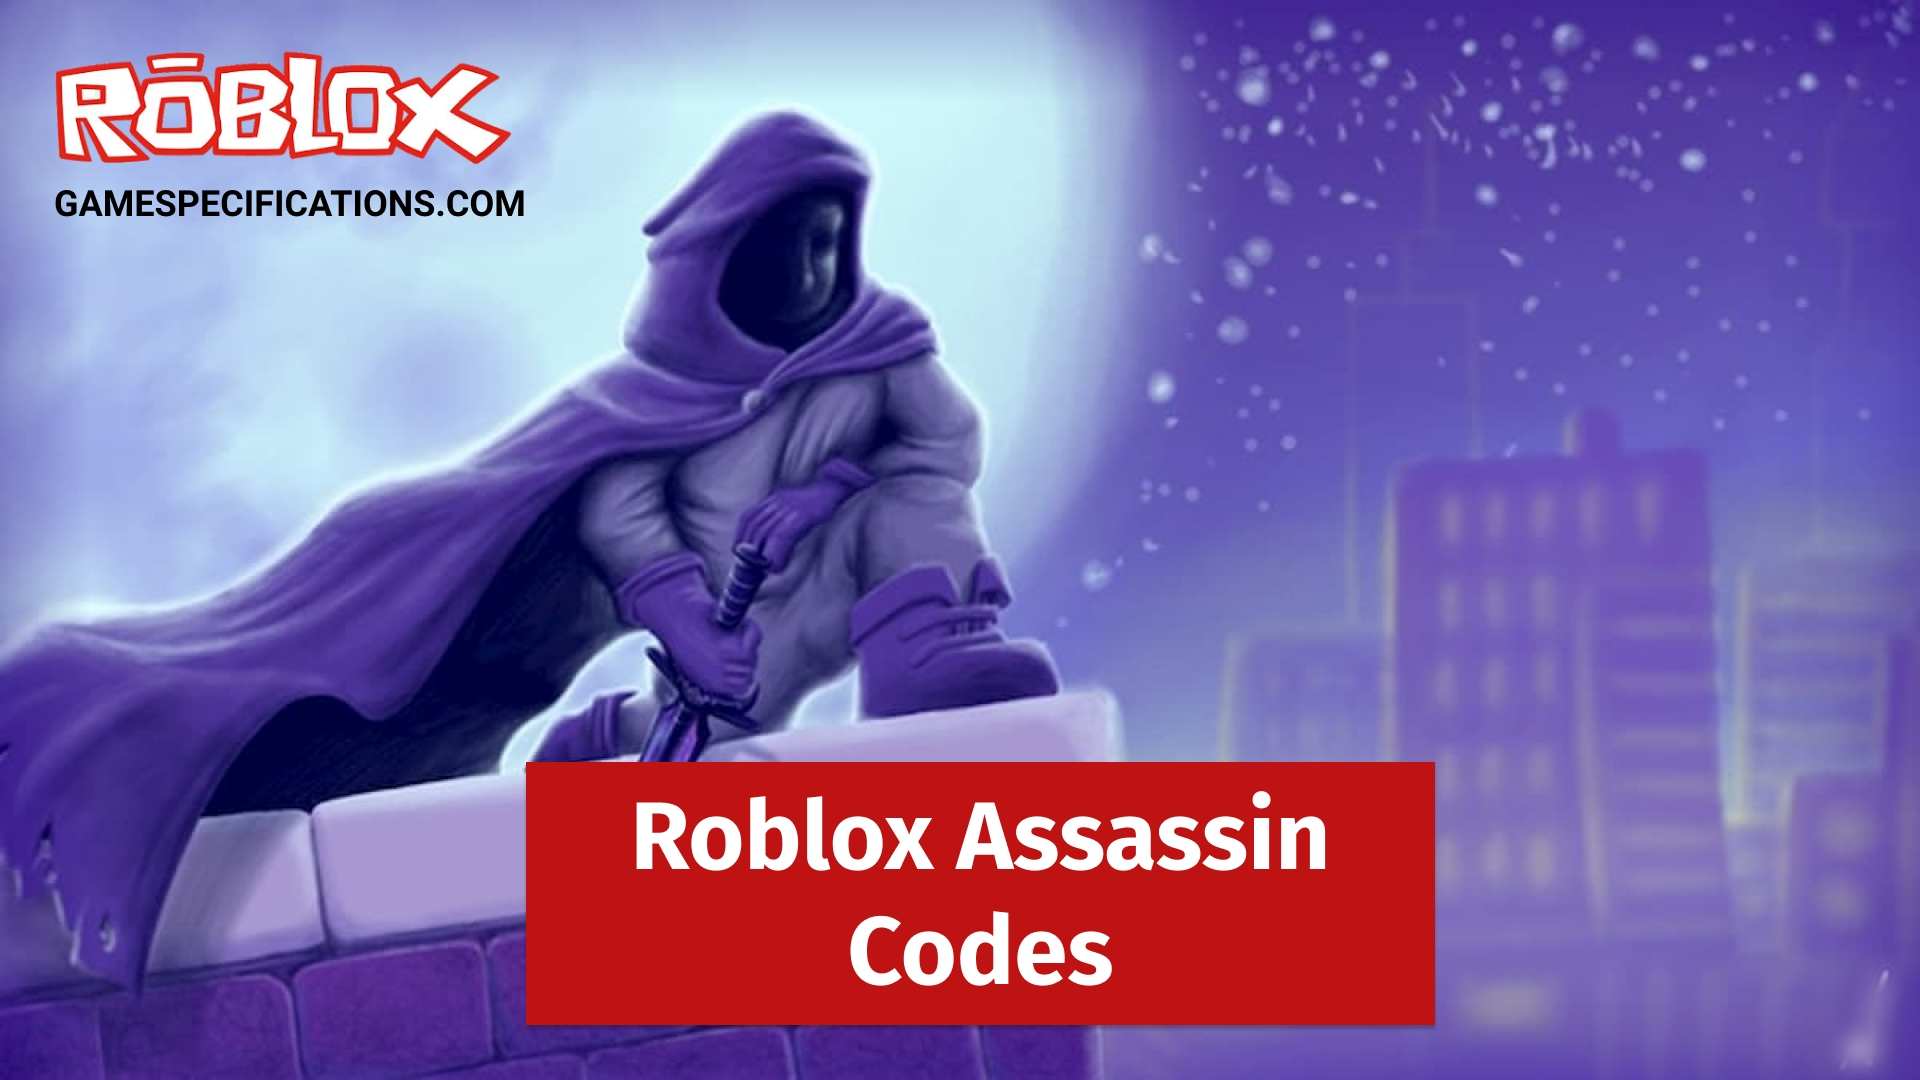 Roblox Assassin Codes July 2021 Game Specifications - roblox hitman